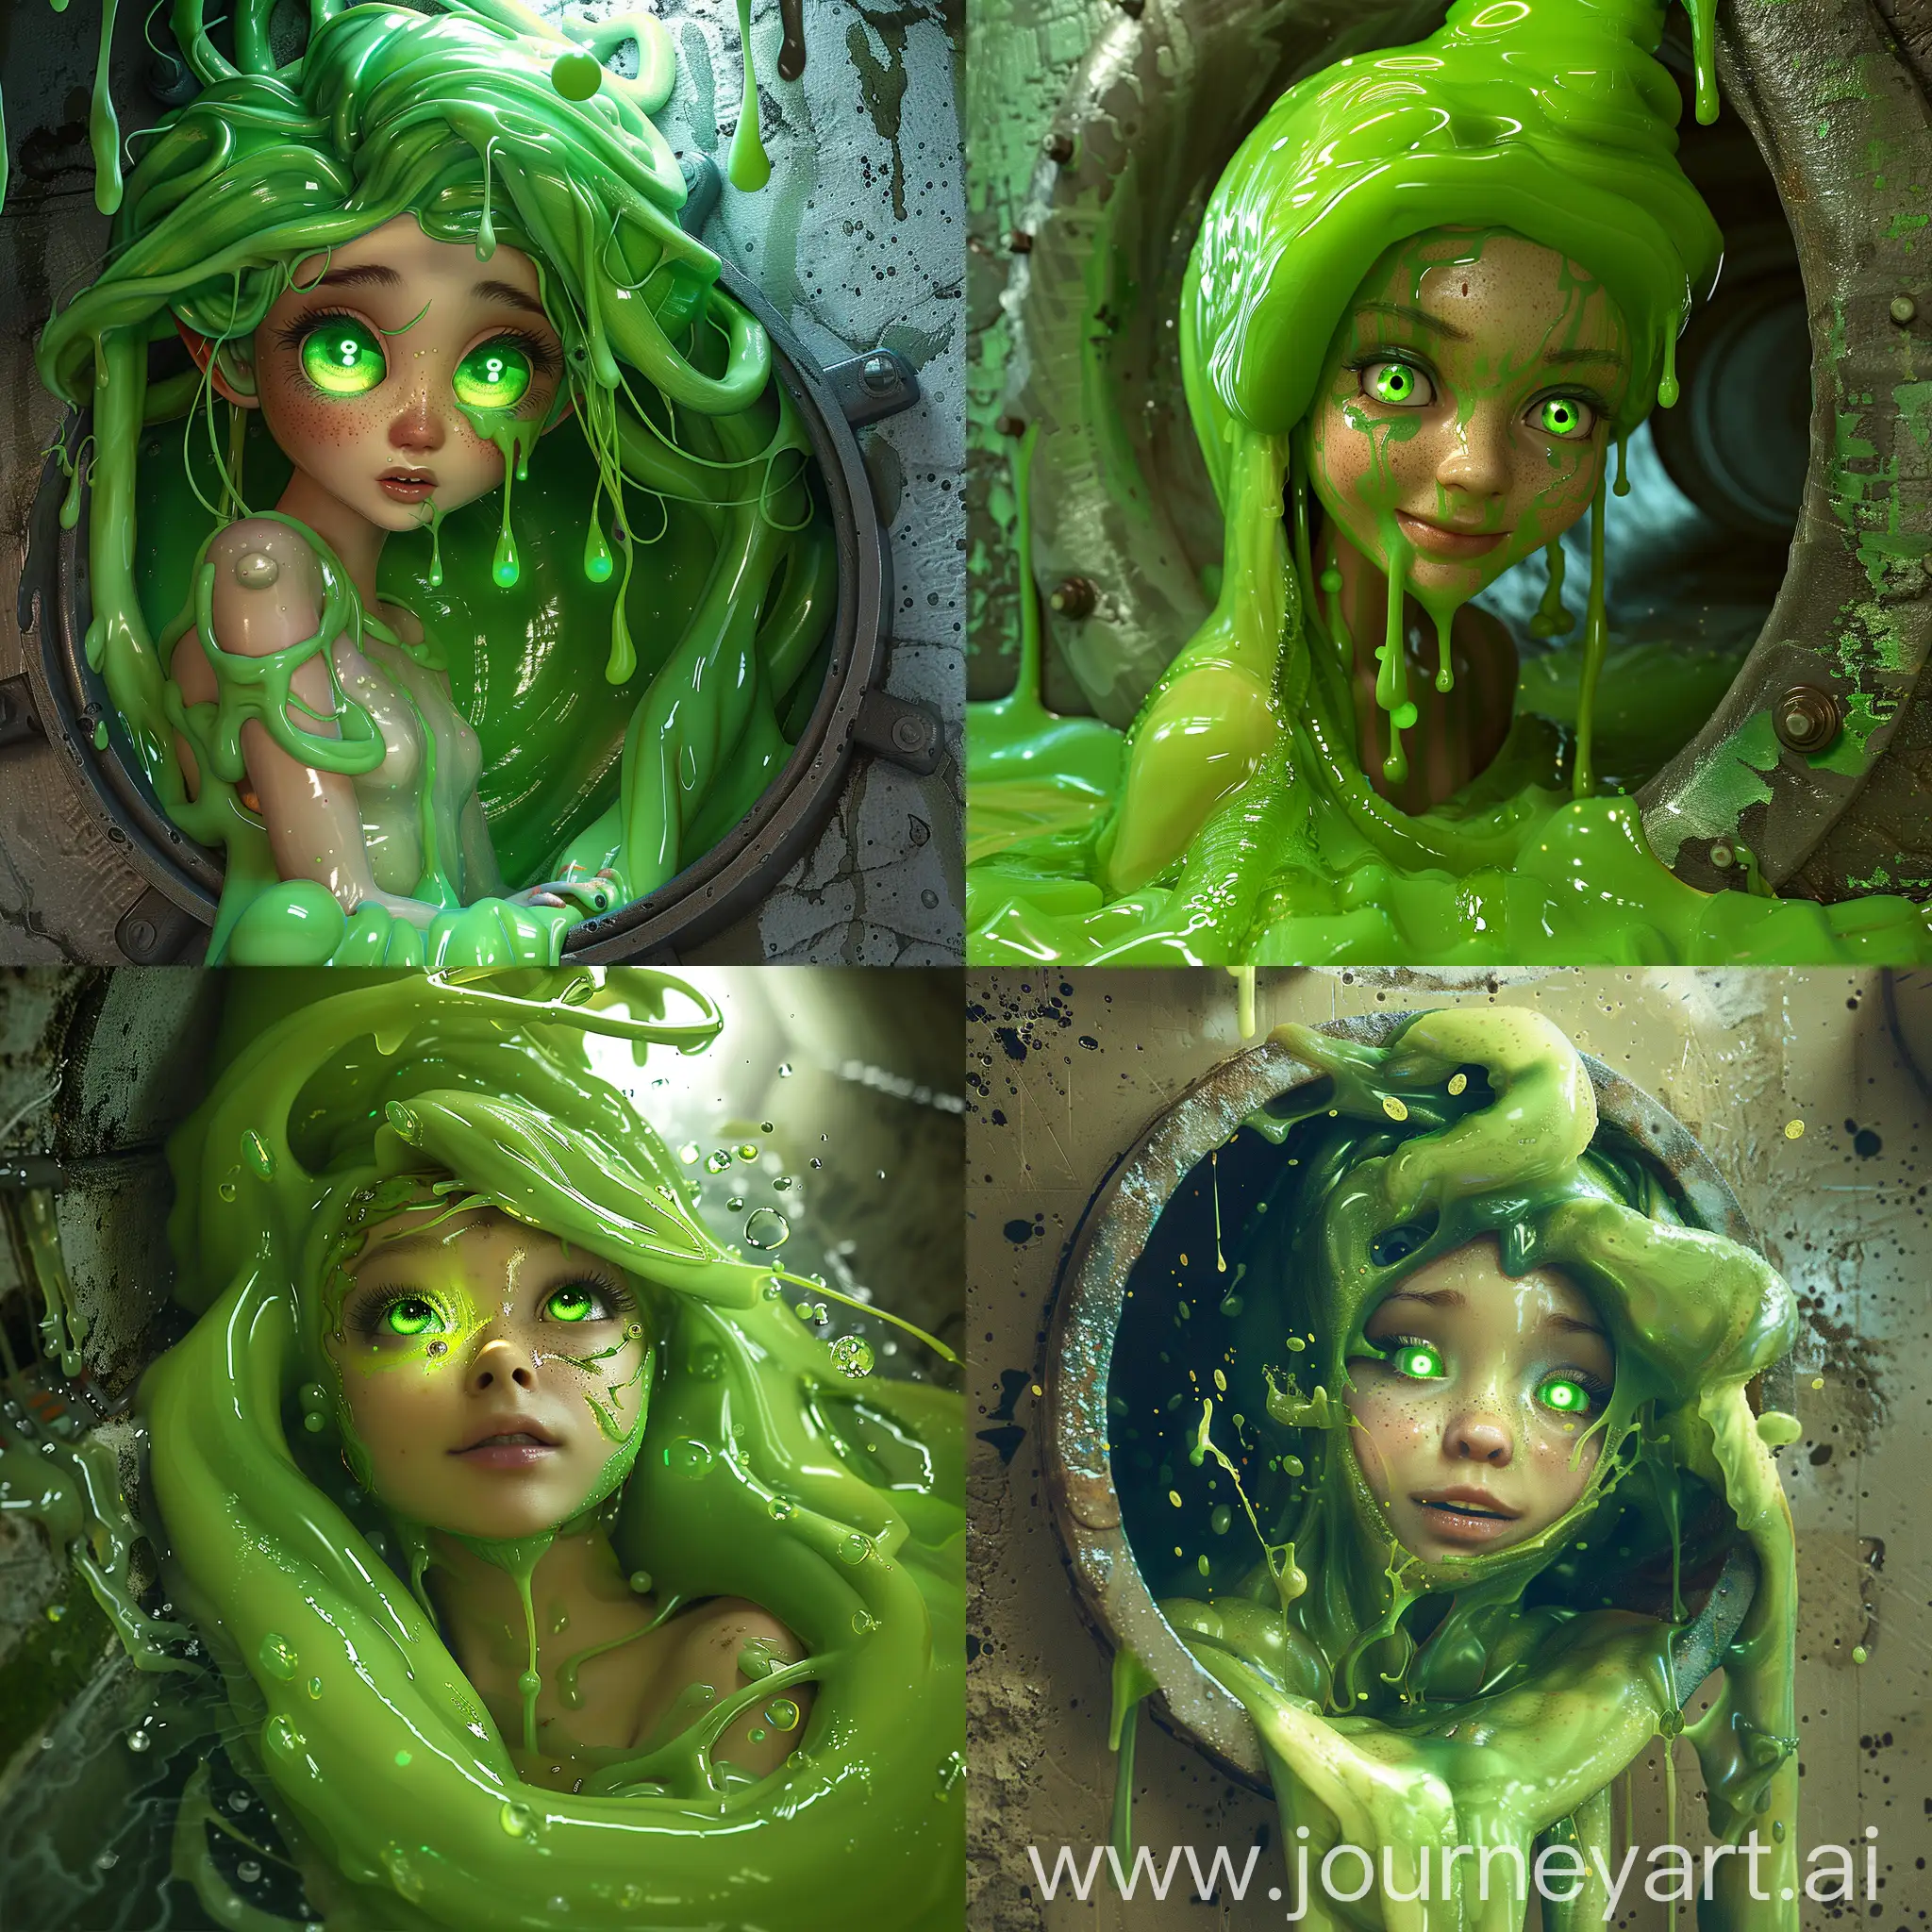 A Fantasy Slime Girl Is Emerging From A Sewer, A Slime Girl Is A Fantastic Being Fully Made From Slime With No Skin Or Flesh, Cute Face, Gorgeous Looks, Feminine, Hot And Attractive, She Is Like A Pile Of Goo But Cute And Funny, Her Eyes Are Bright Light Having Green Orbs, And Her Body Is Full Of Slime, Her Hair Is Just Green Colored Slime Dripping From Her Head, High Detailed, 8k, Detailed, Detailed Slime Face, Anime Like Slime, Steampunk Creature, No Attire, Slime Green Body, Steampunk Creature